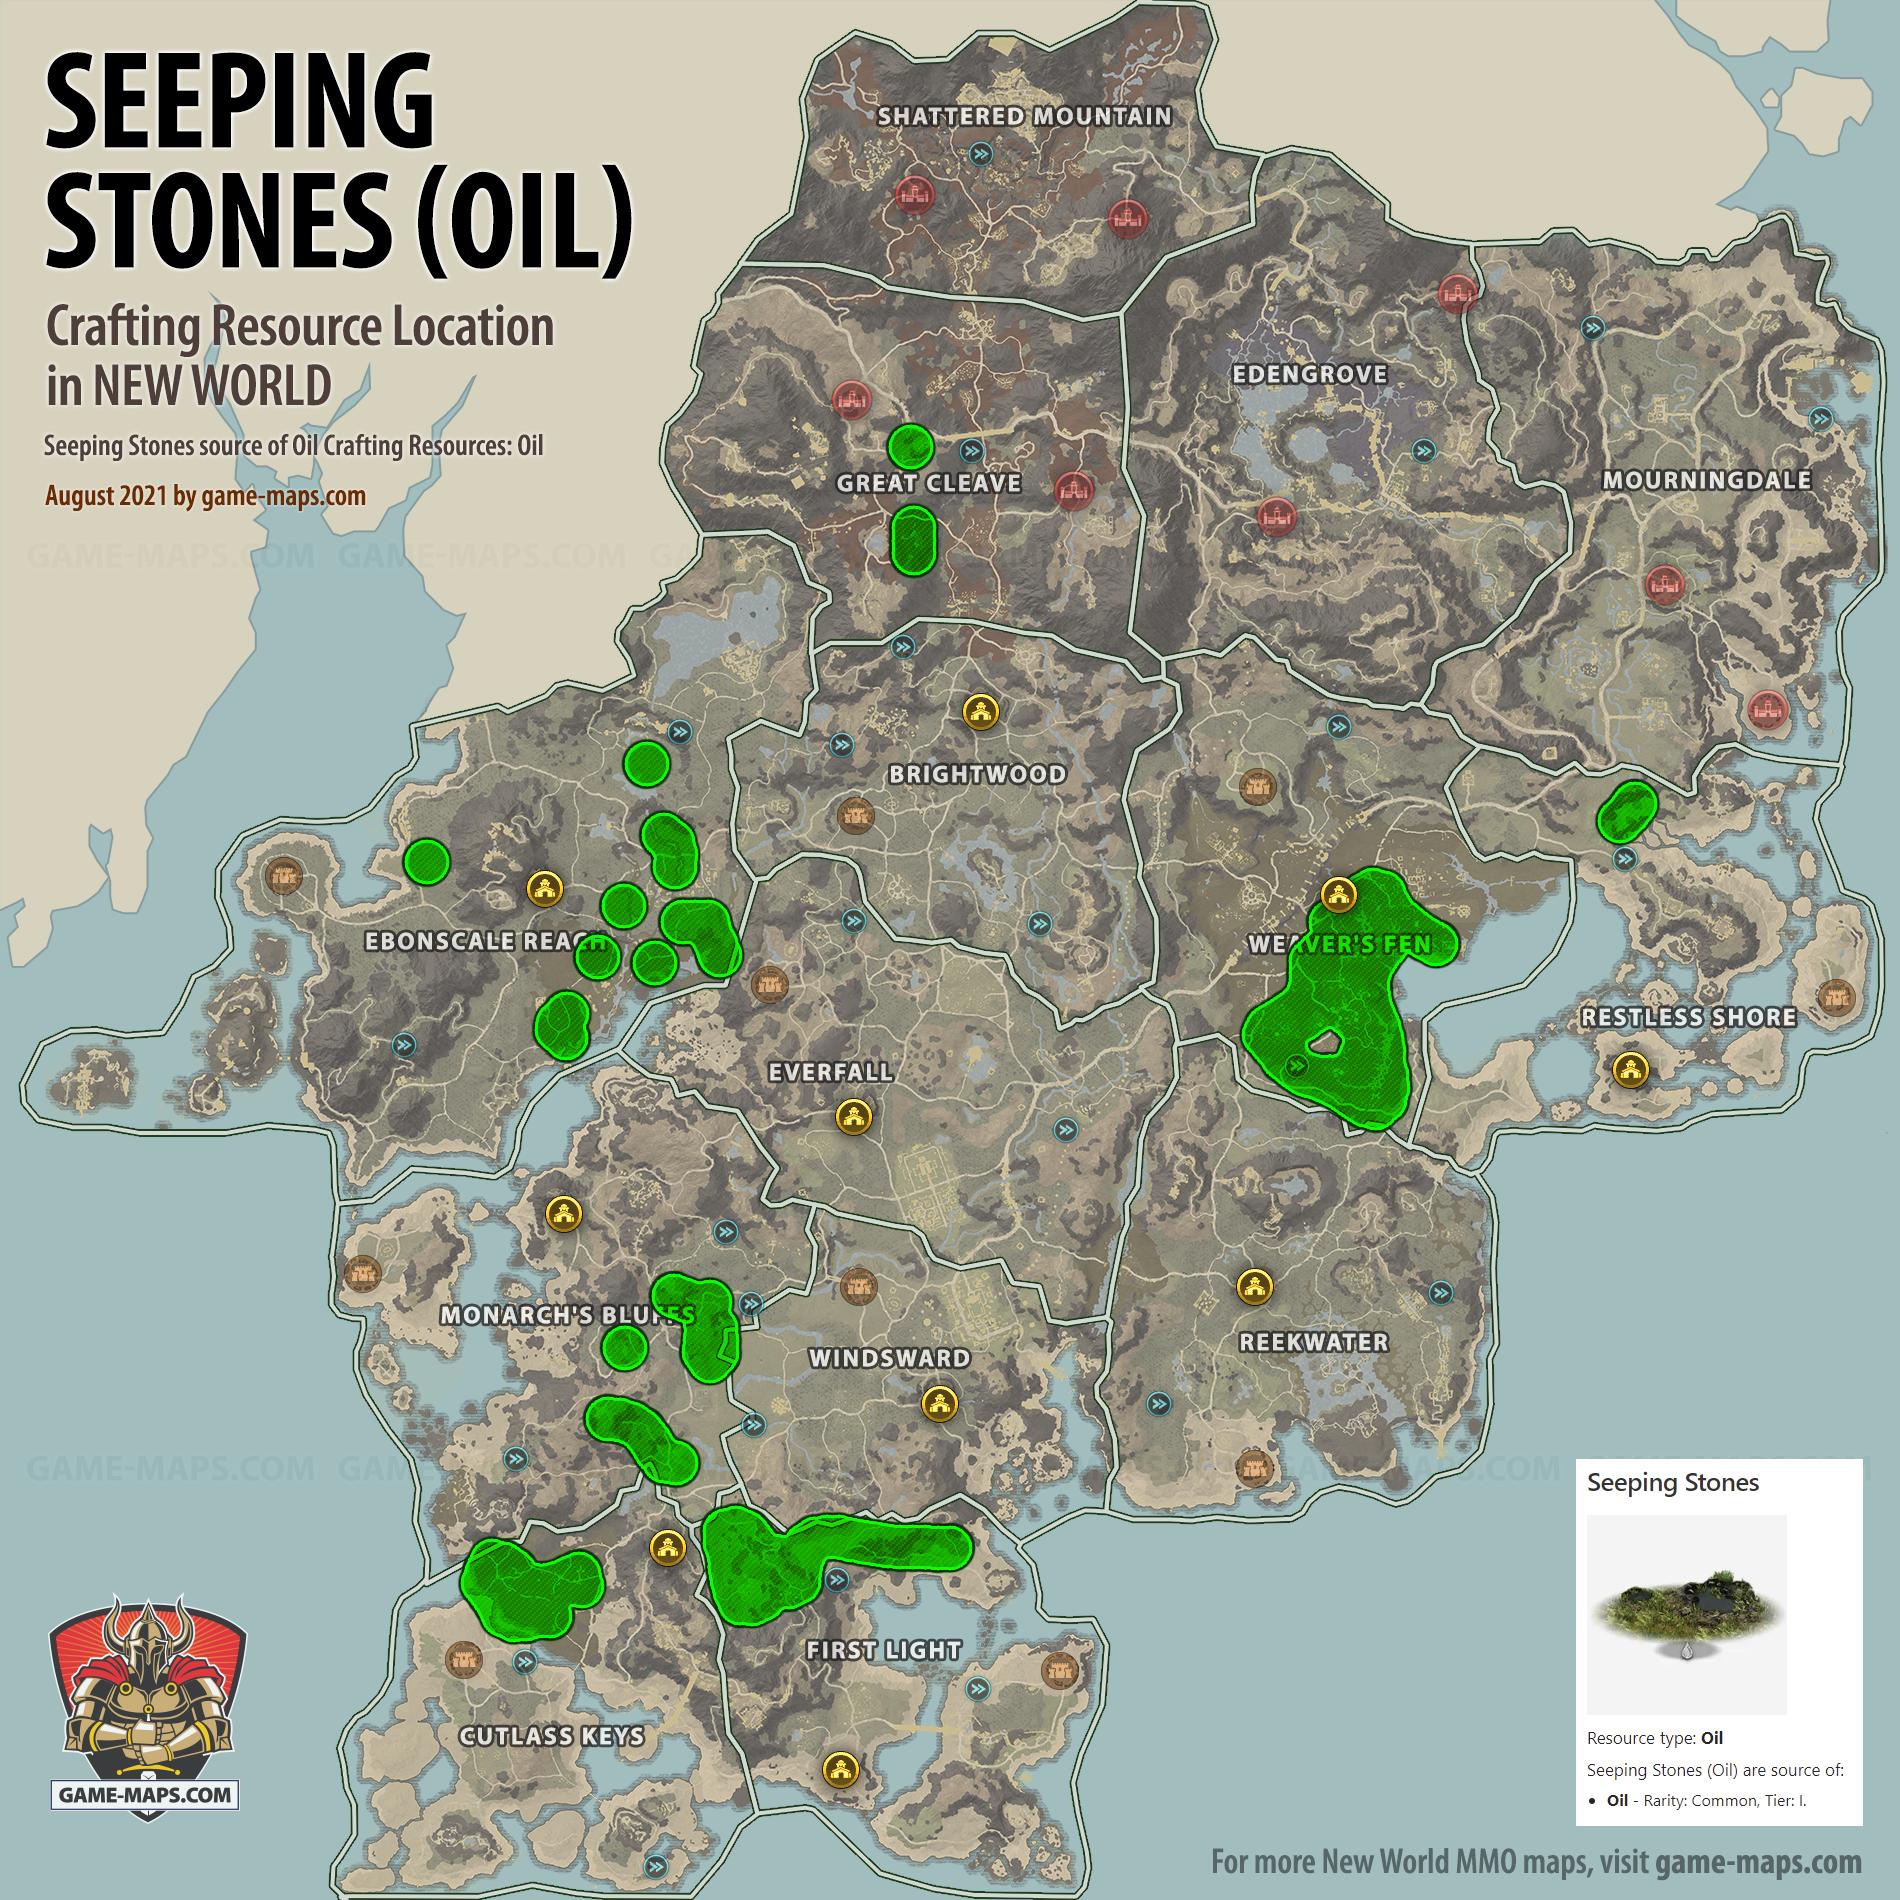 New World Resource Location Map of Seeping Stones (Oil), source of Oil Crafting Resources: Oil.